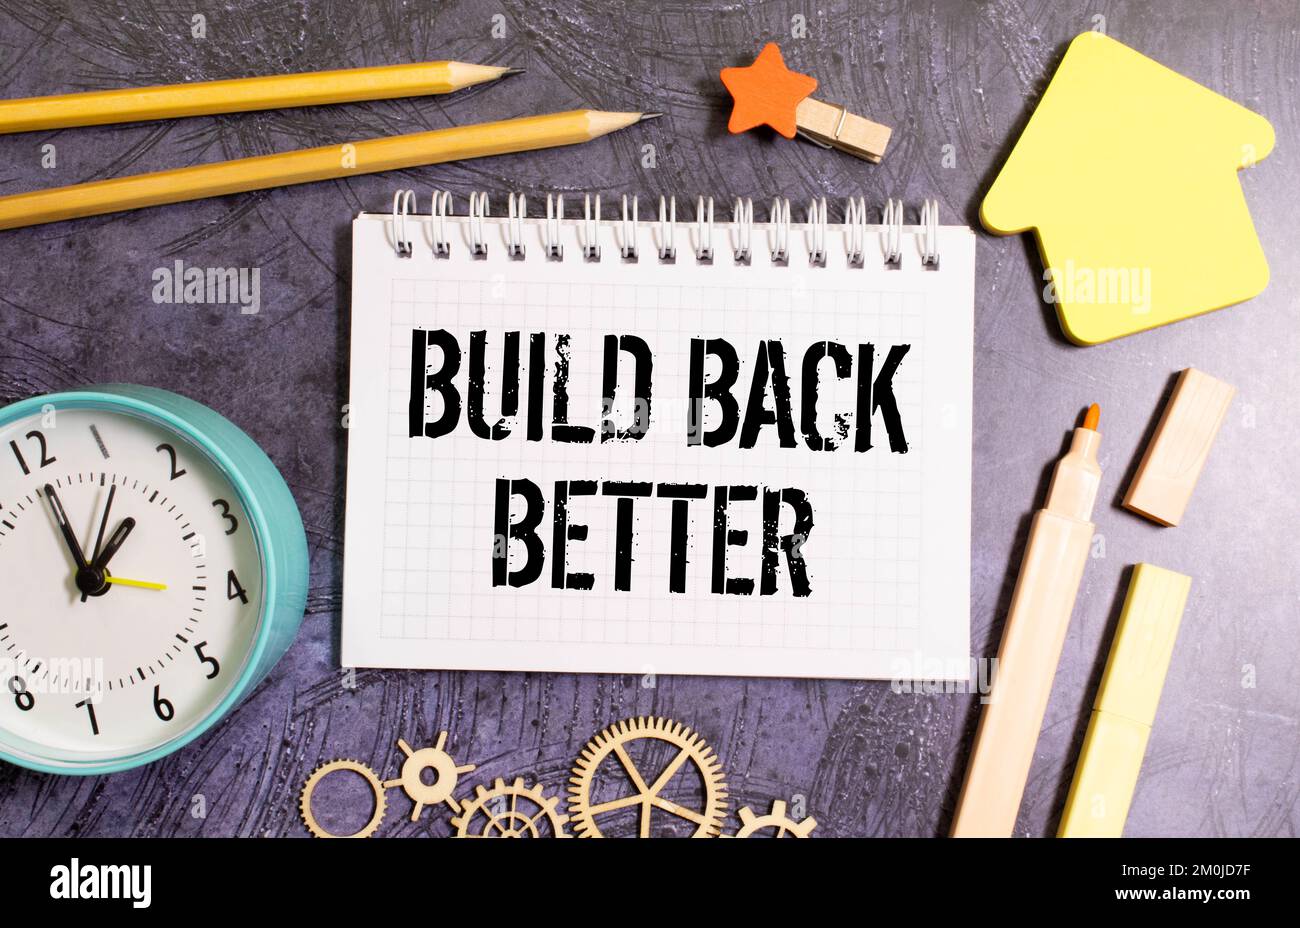 Build back better written in white chalk on a black chalkboard isolated on white. Stock Photo